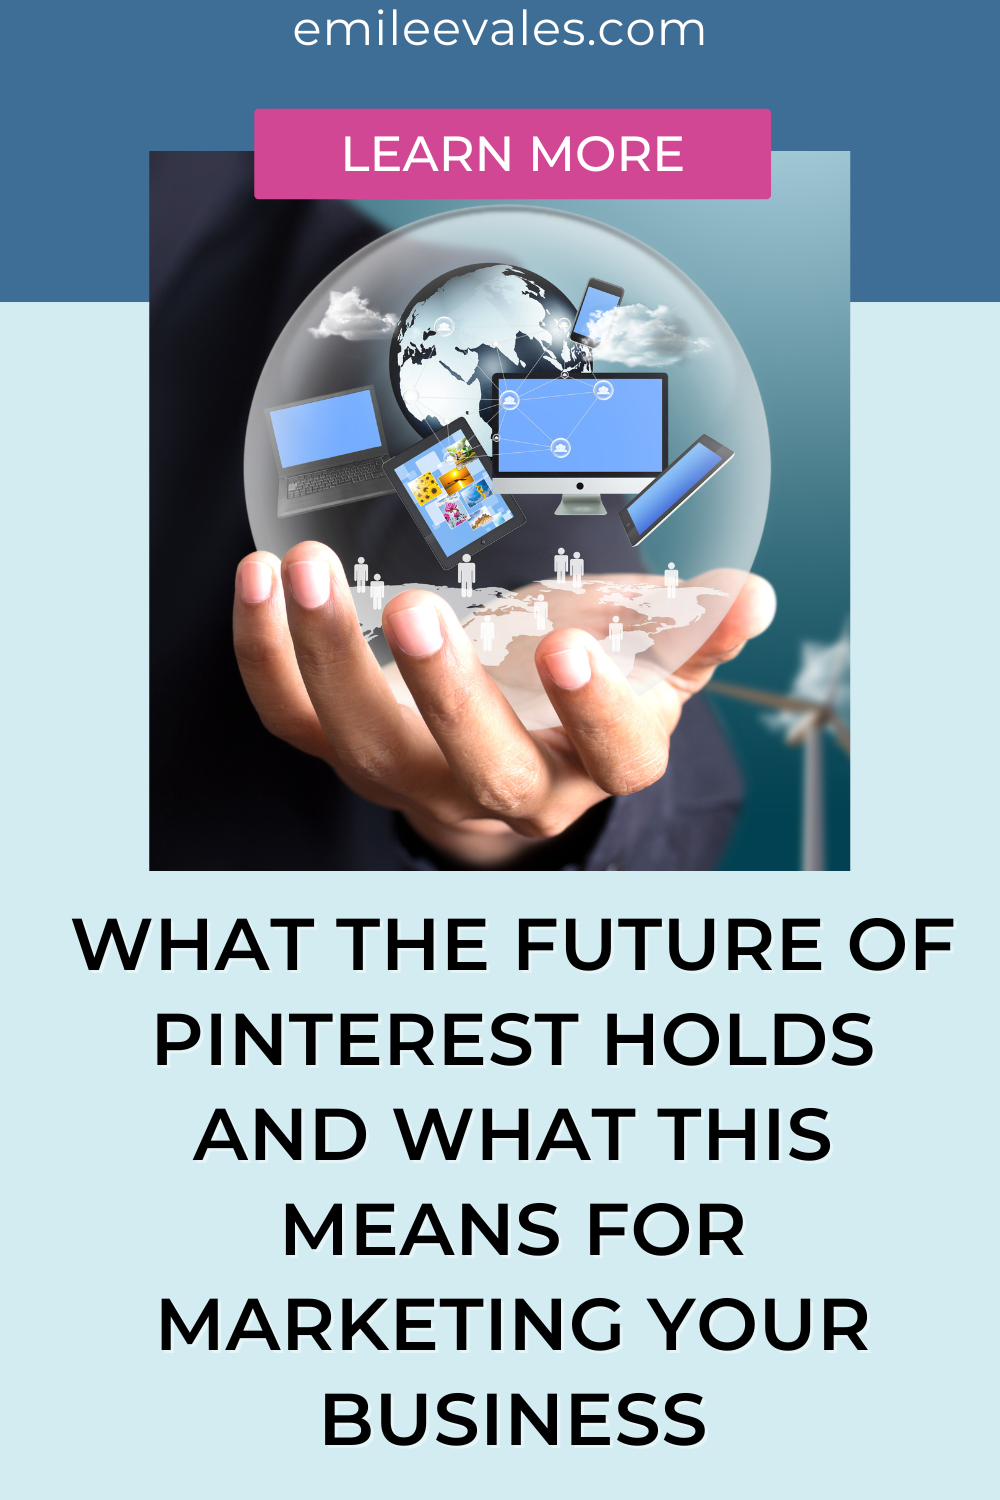 What the future of Pinterest holds and what this means for marketing for your business